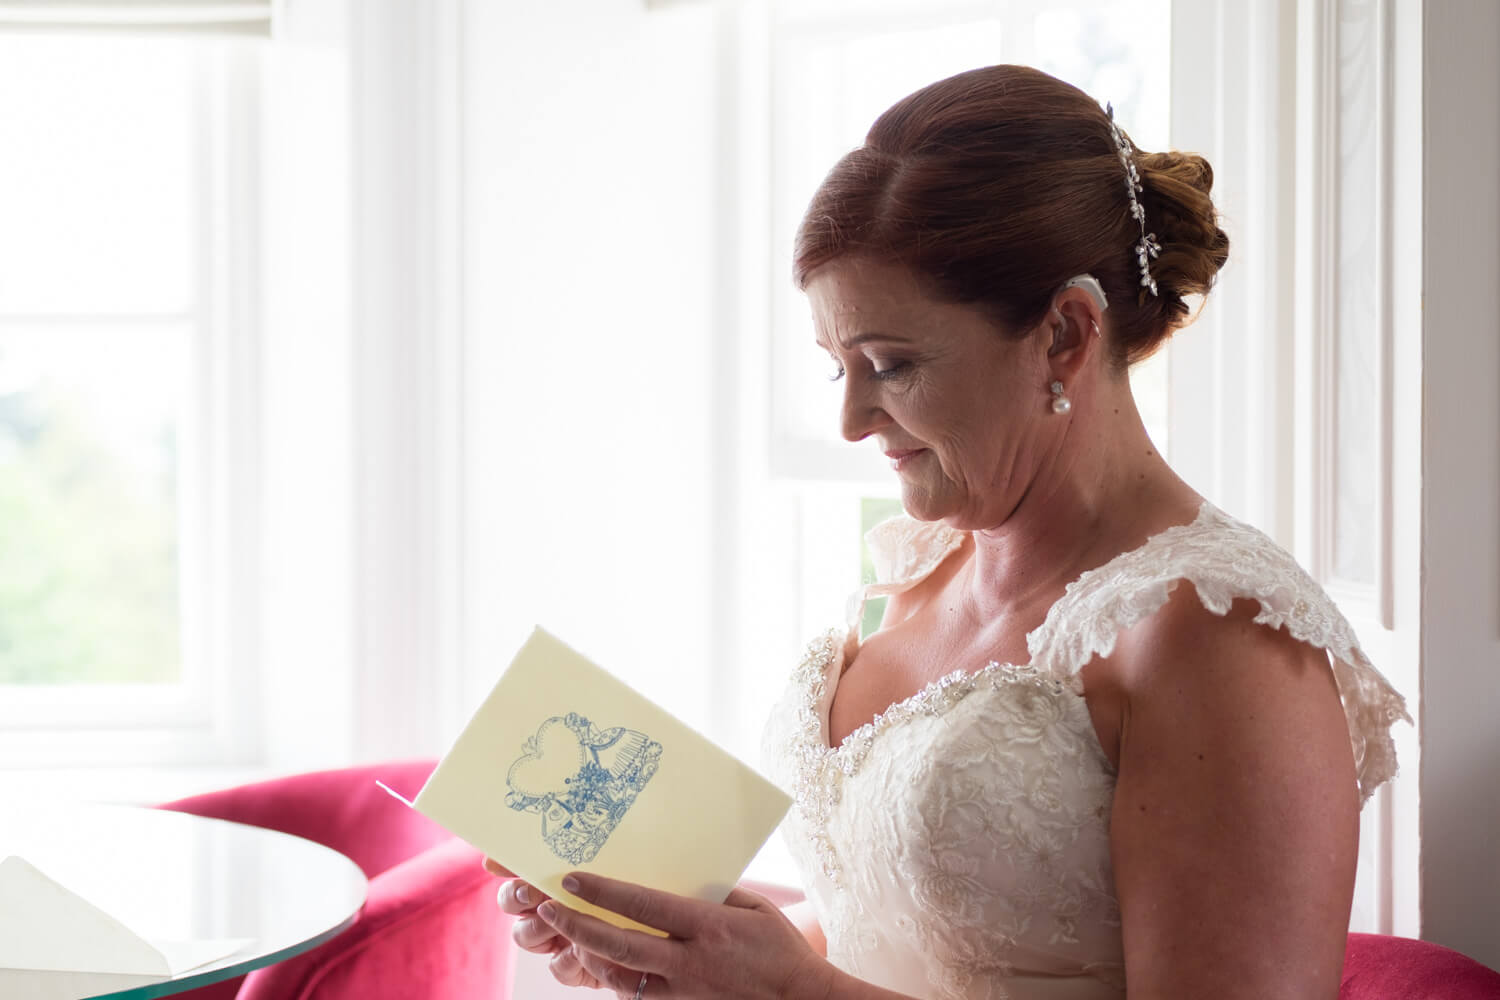 the bride sits and reads a card from her husband-to-be